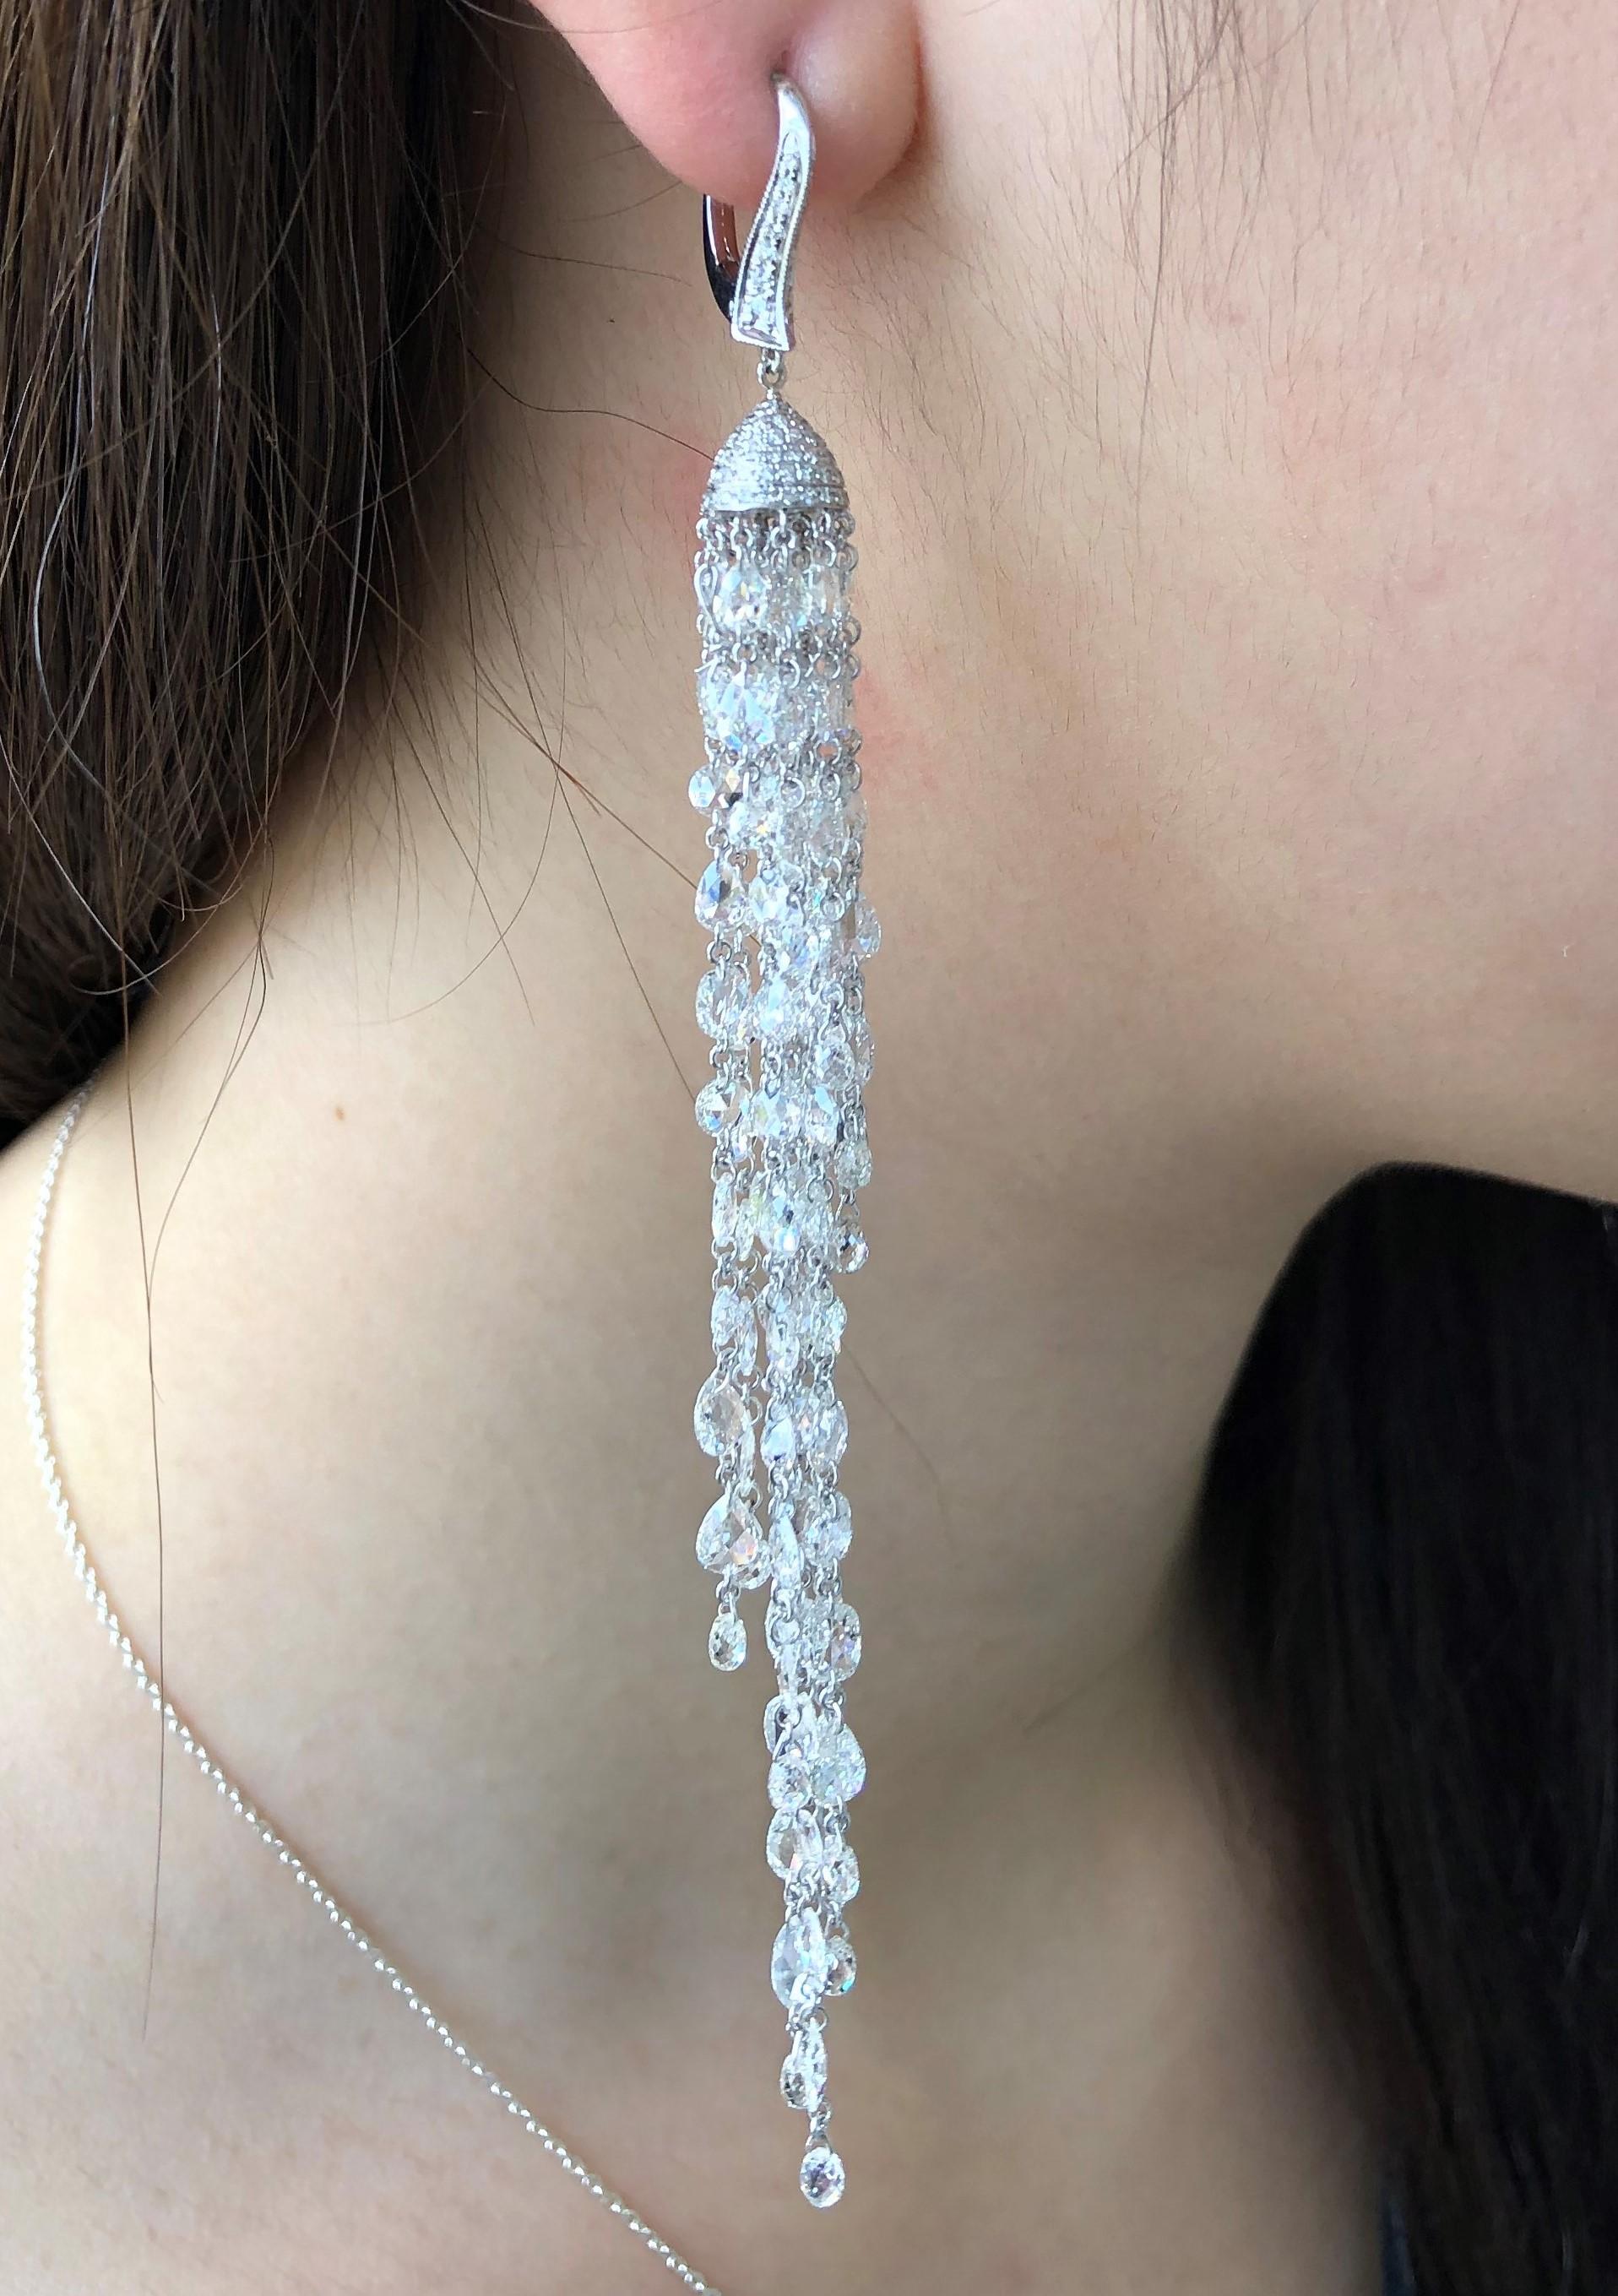 JR 23.18 carats Rose Cut Diamond Tassel Earring

Stylish, graceful and elegant is what this set of diamond tassel earring is. It moves with sheer grace and is made using excellent craftsmanship.

Diamond Weight : 23.18 carats
Length approx :